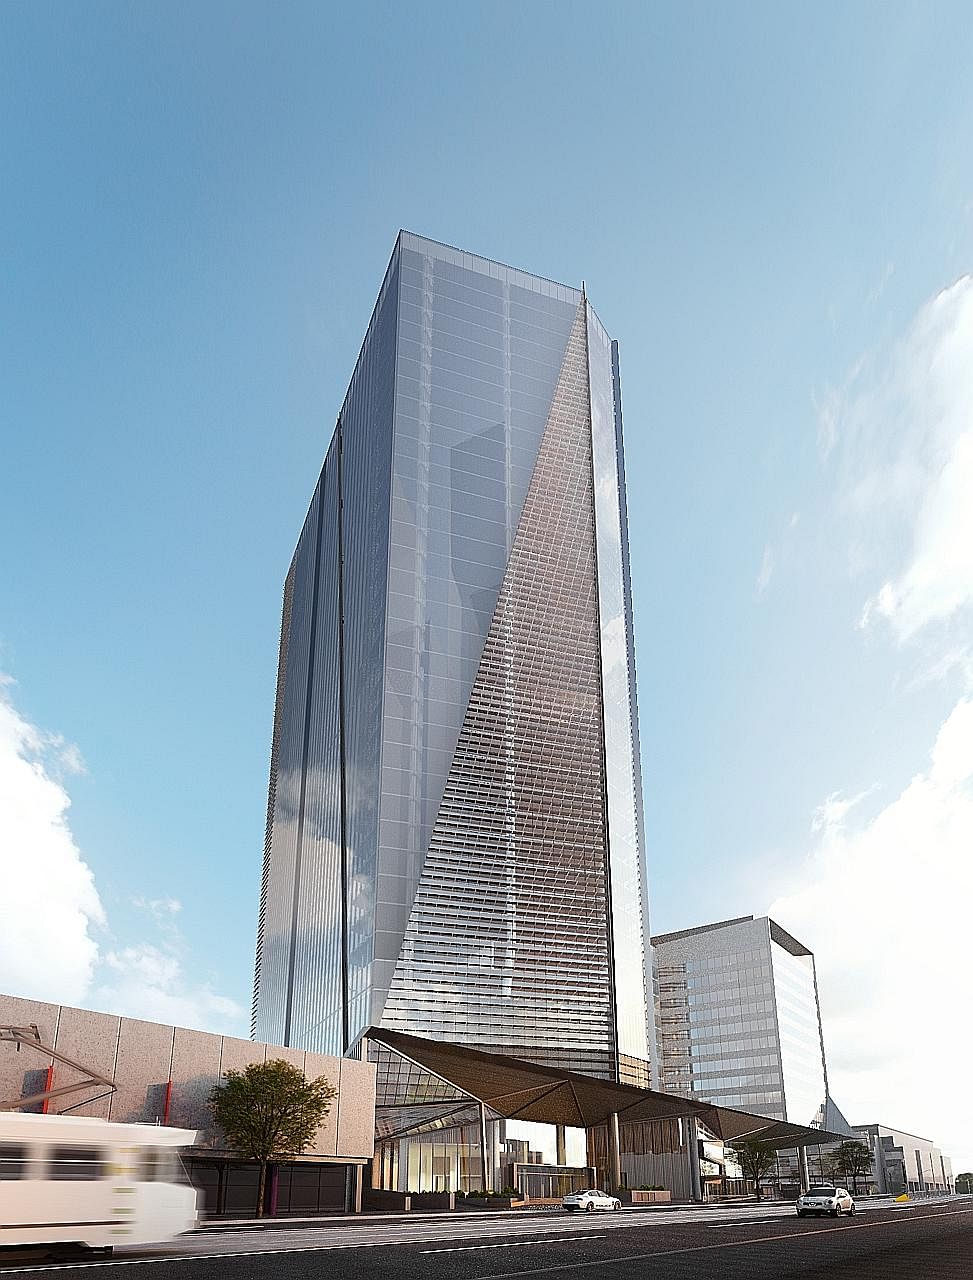 An artist's impression of 311, Spencer Street, to be developed in Melbourne. Keppel Reit expects the 42-storey office tower, which will be its second freehold office development in the city, to strengthen its portfolio.